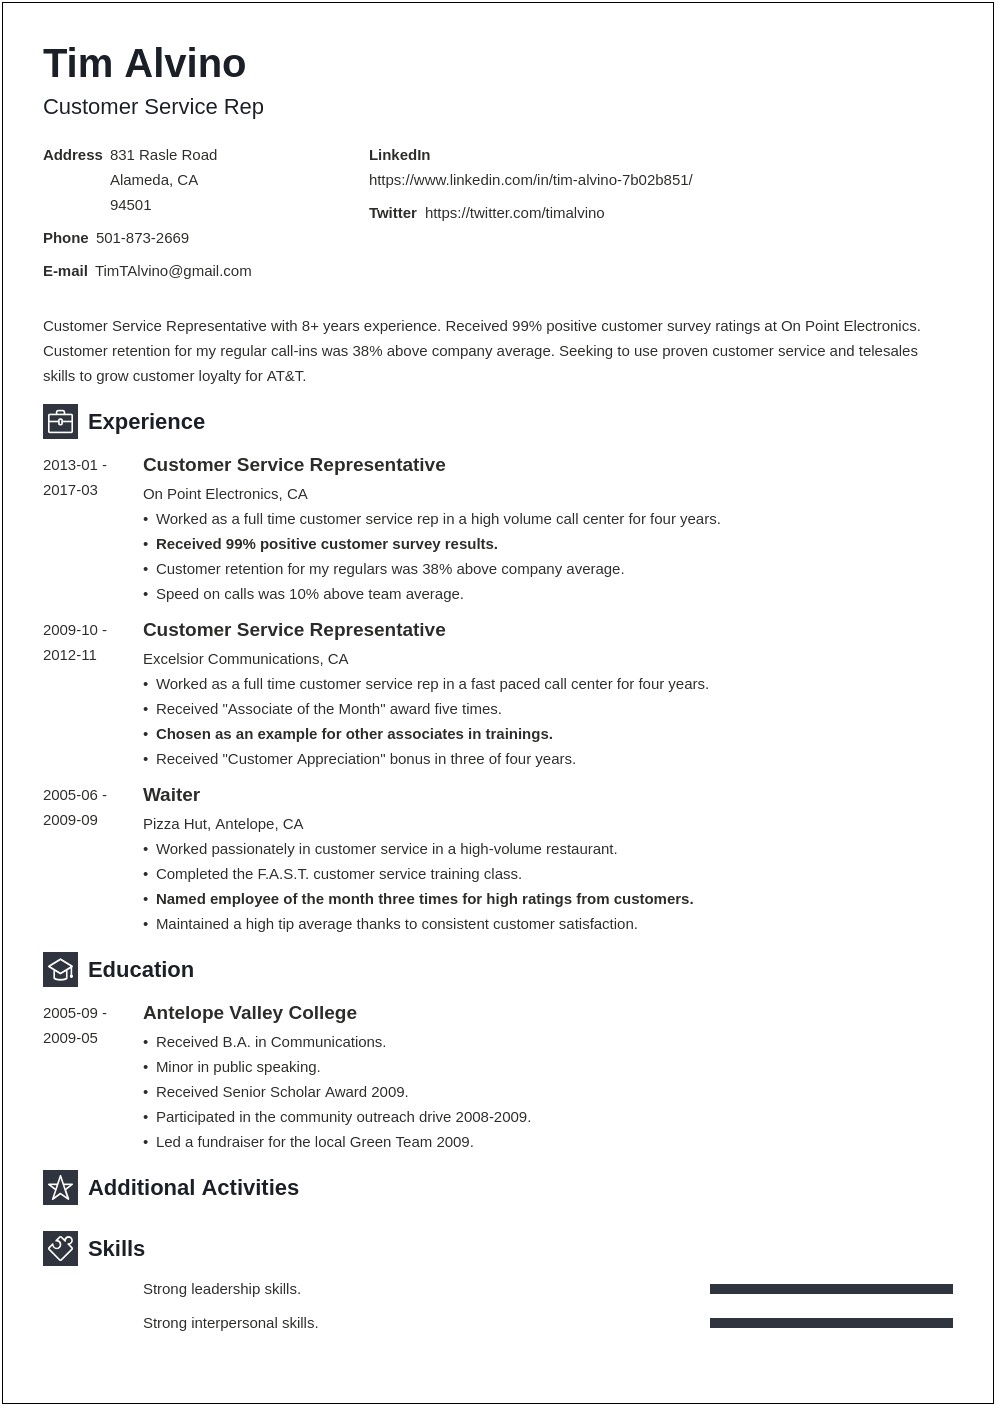 Examples Of Resume Objectives Customer Service